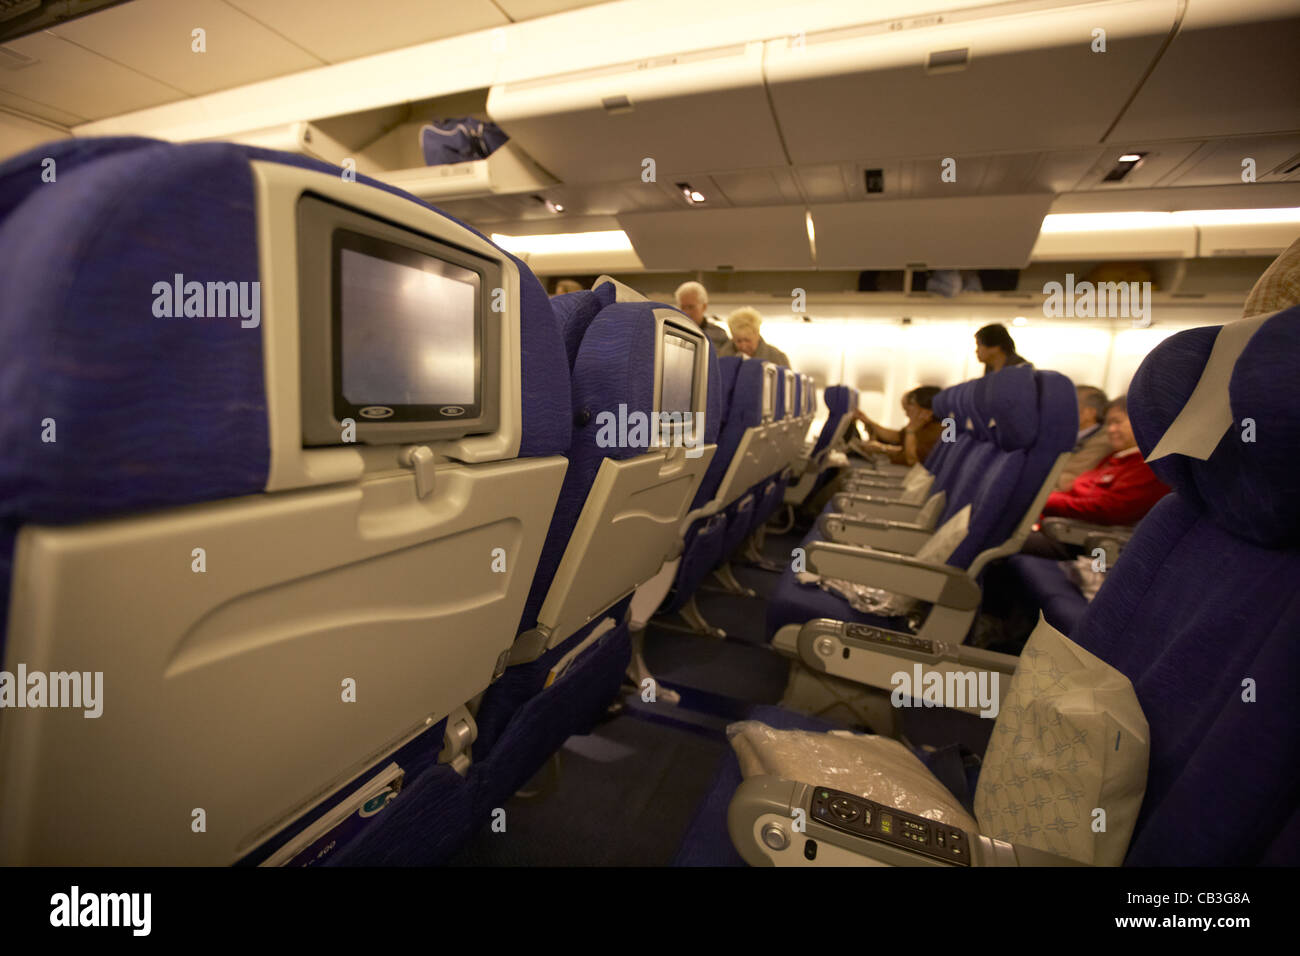 rows of seats with individual entertainment seat back screens on board a 747 passenger aircraft Stock Photo